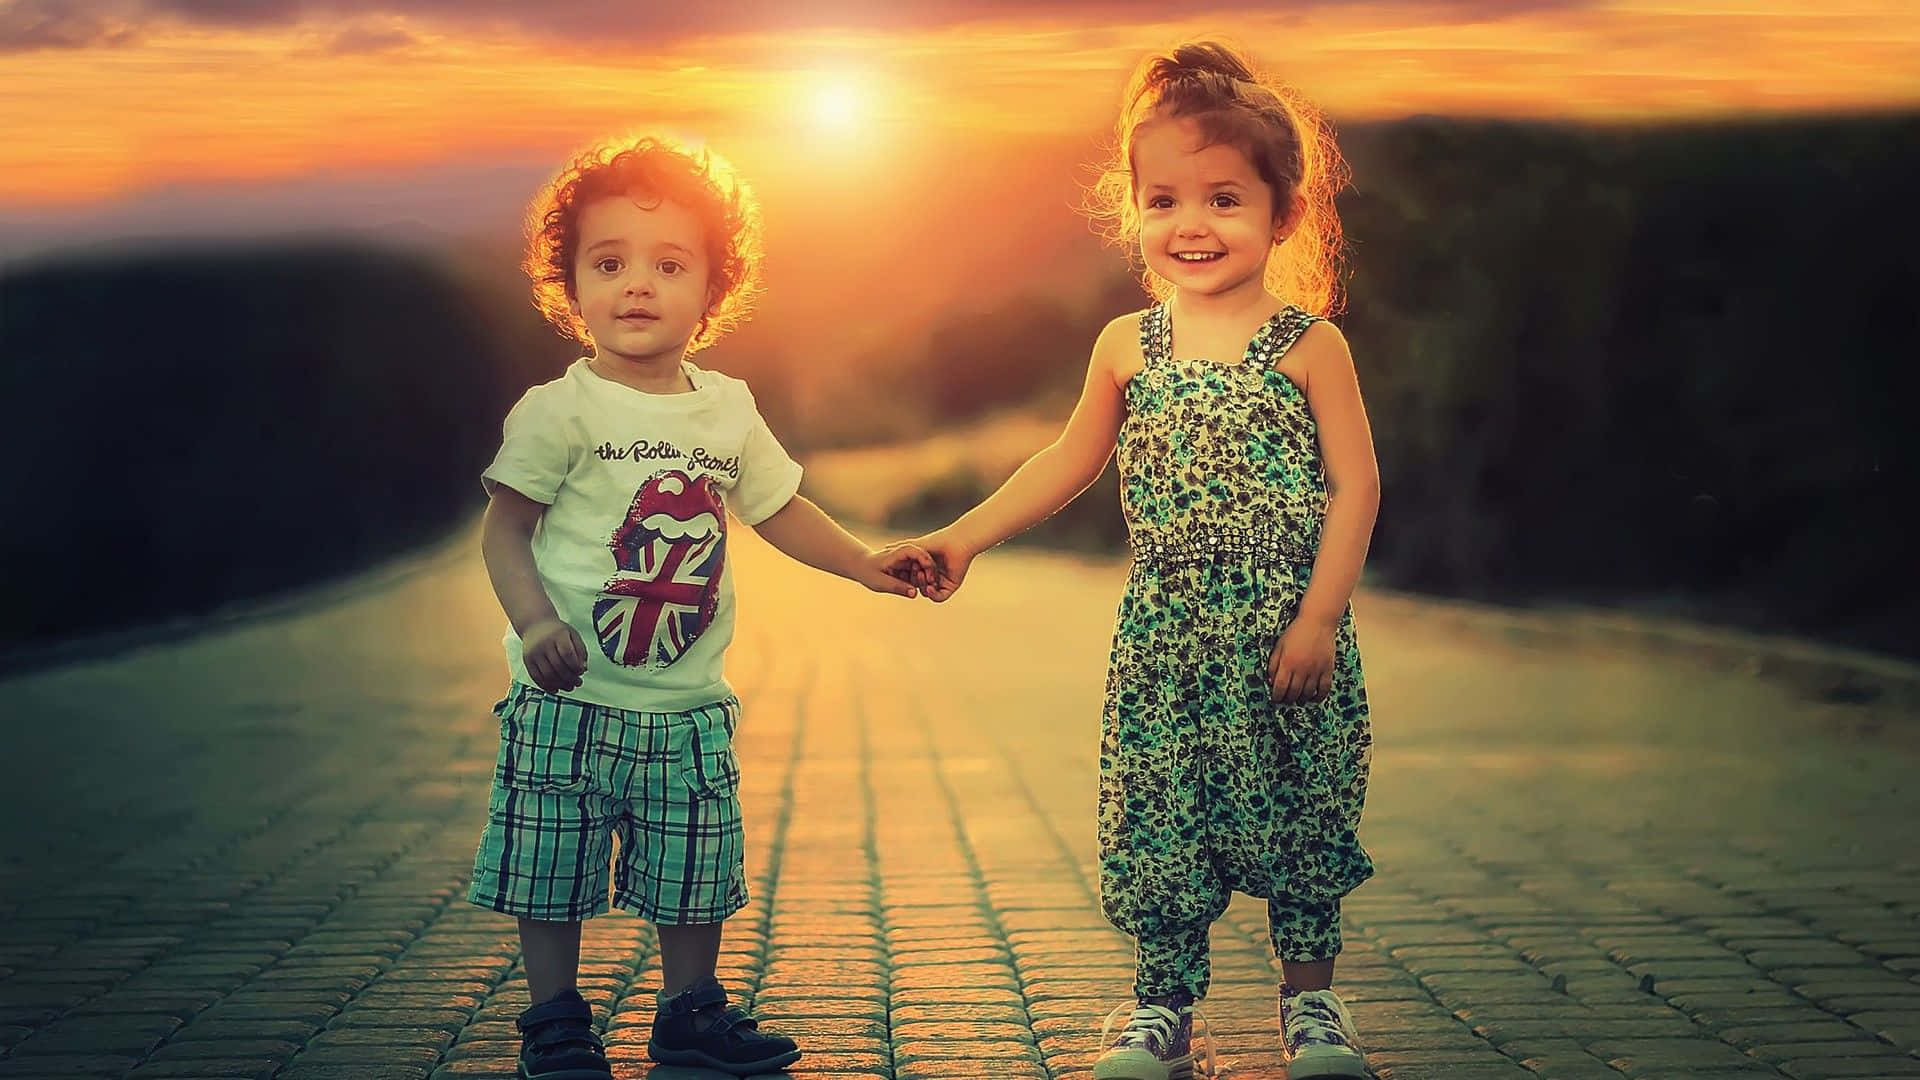 Download Cute Baby Couple Holding Hands Sunset Wallpaper 